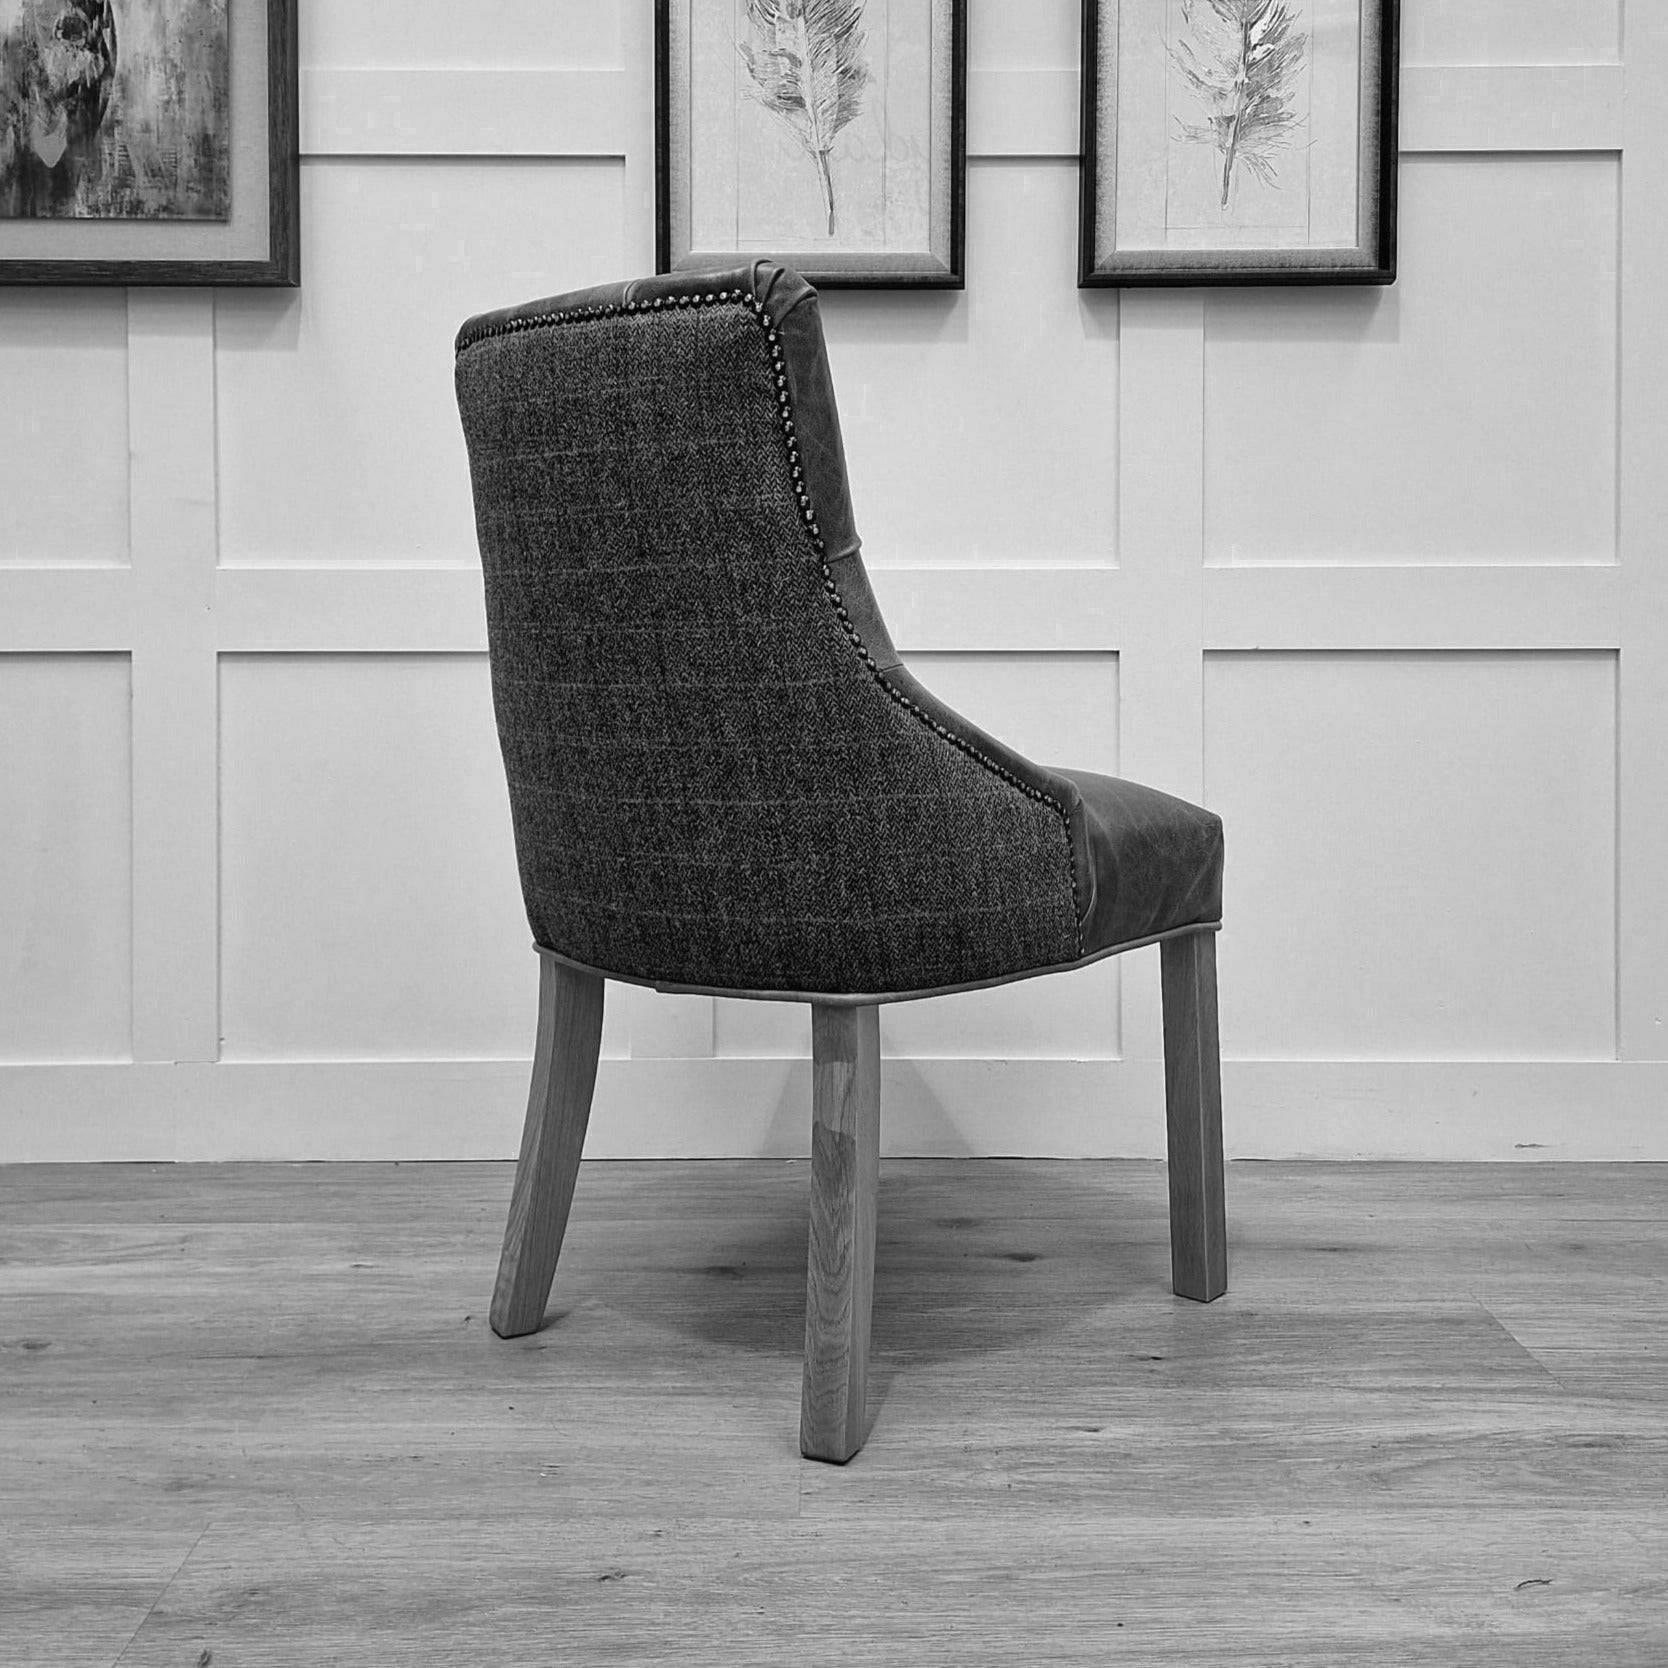 Bespoke Harris Tweed And Leather Dining Chair - Model 7 - Rydan Interiors